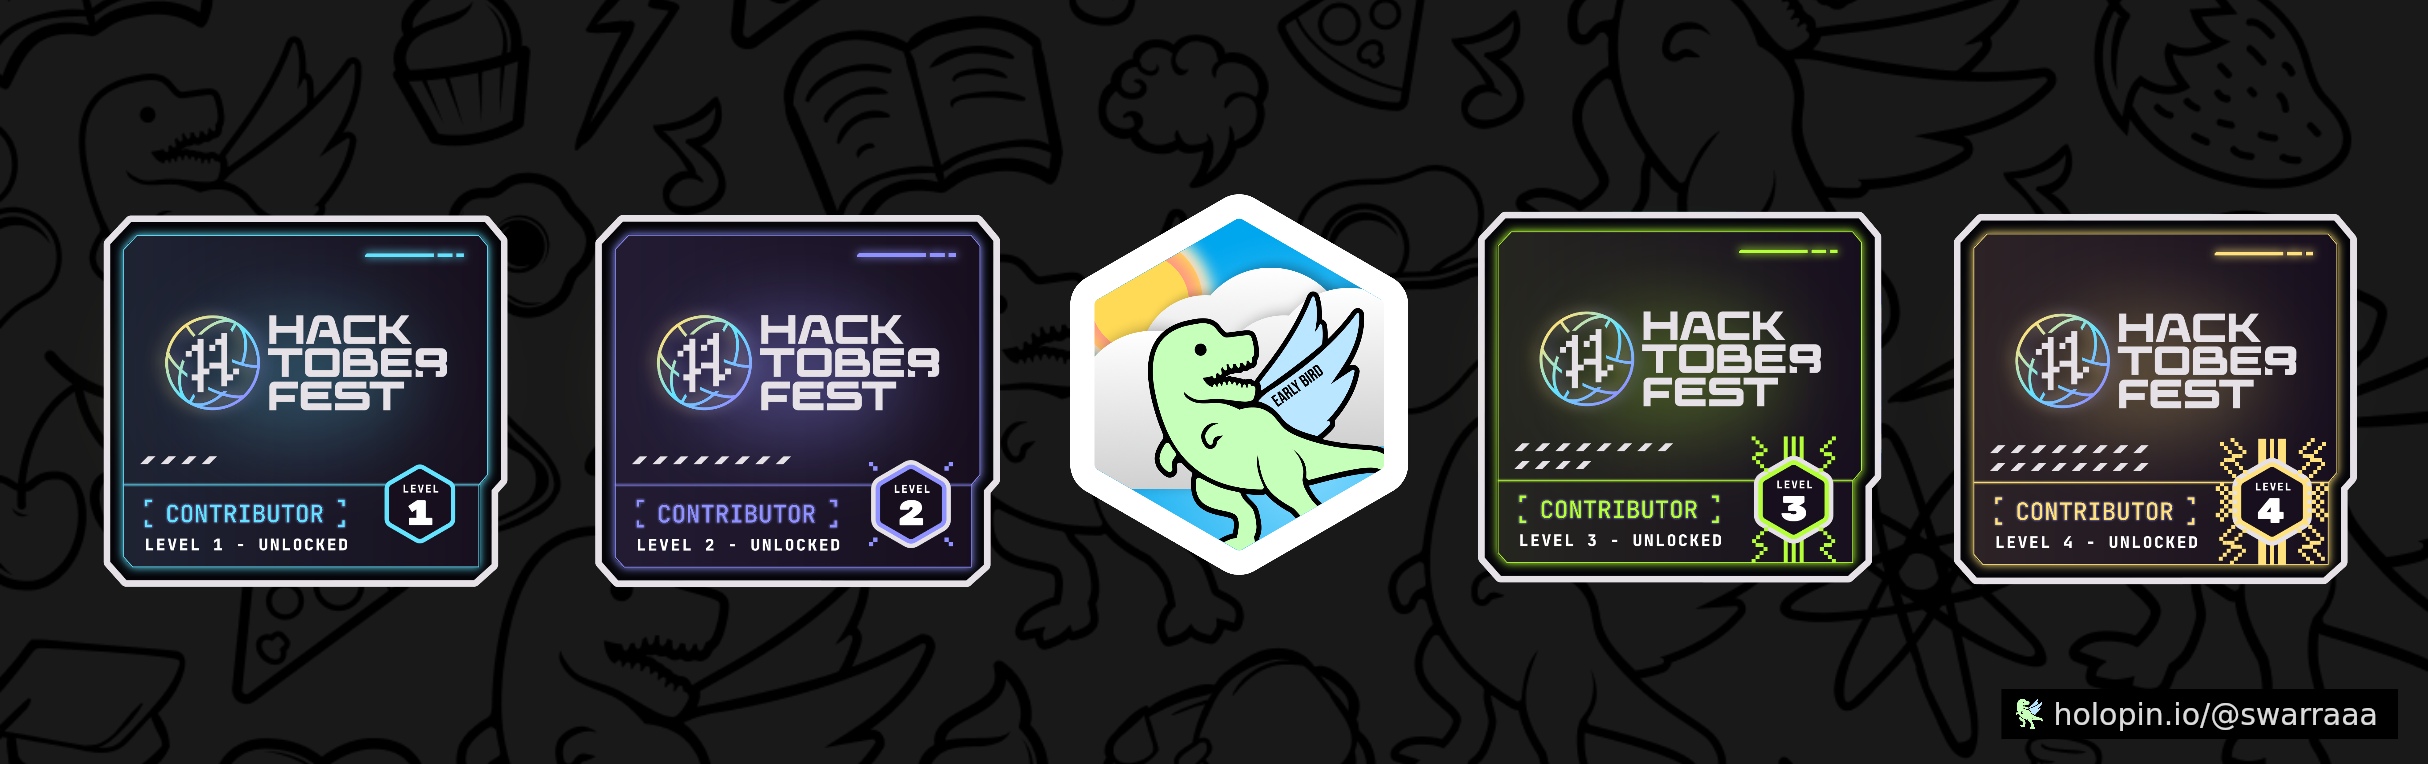 An image of @swarraaa's Holopin badges, which is a link to view their full Holopin profile